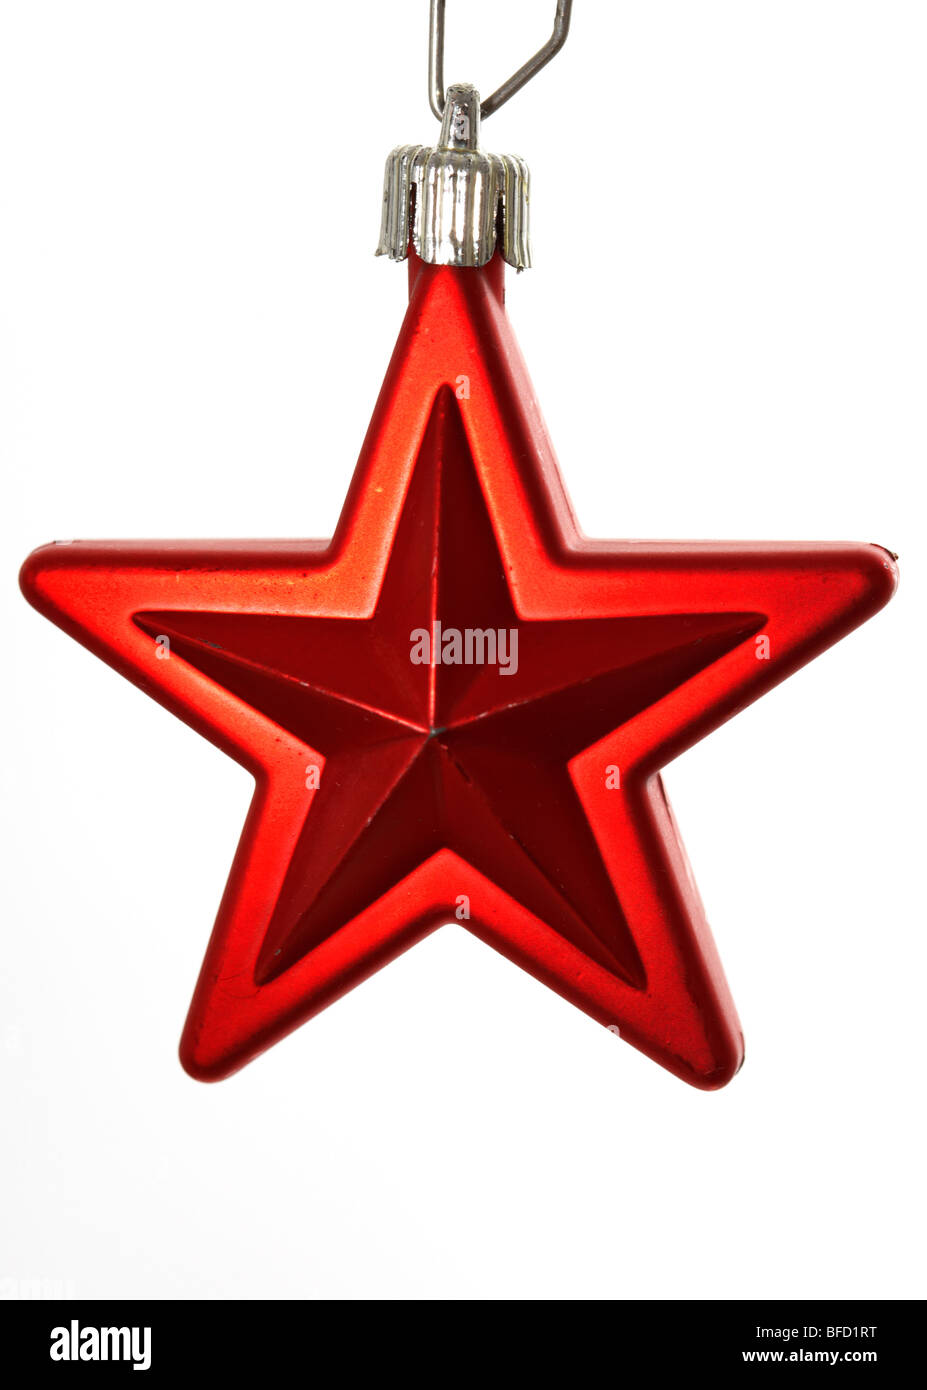 slighty worn red star christmas tree decoration hanging against a white background Stock Photo